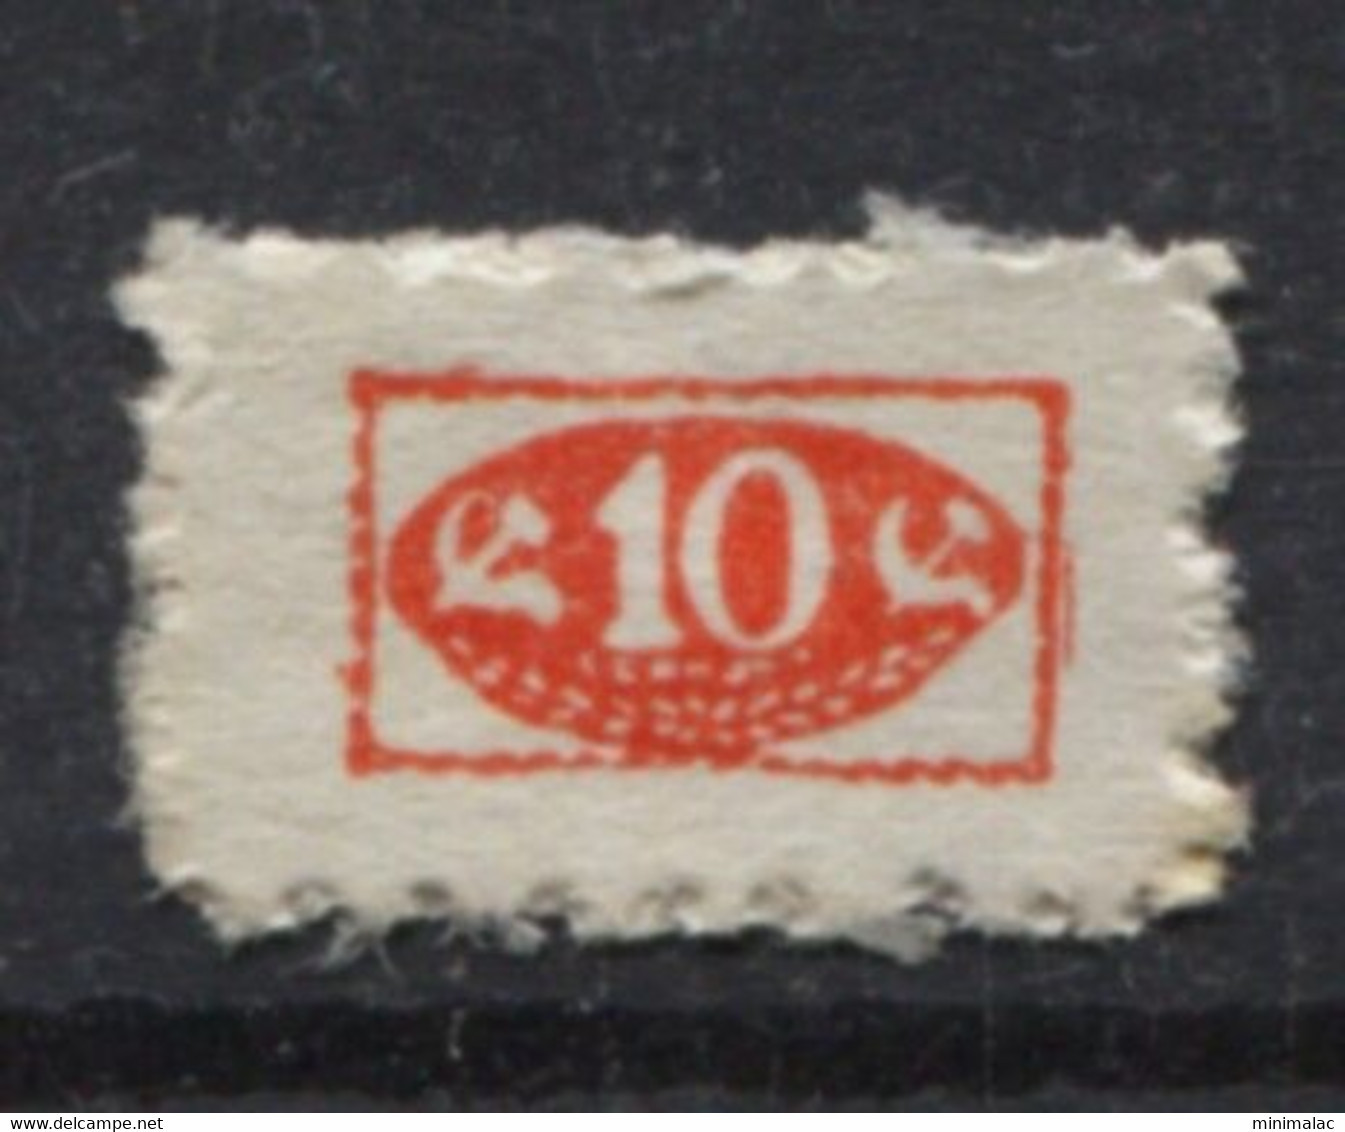 Yugoslavia 1959, Stamp For Membership SSRNJ, Labor Union, Administrative Stamp - Revenue, Tax Stamp,10d - Officials